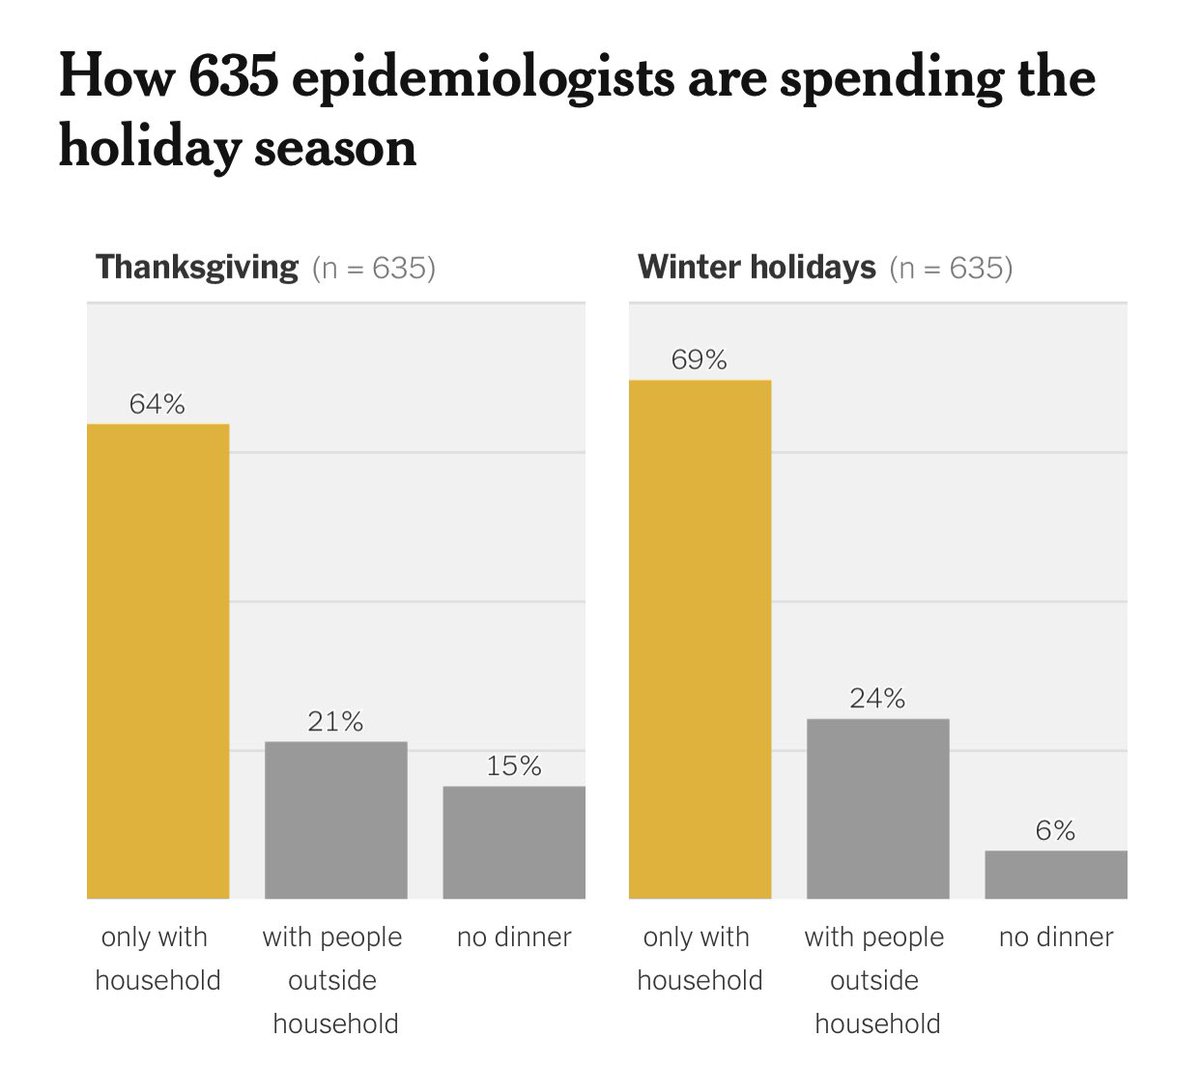 NO EPIDEMIOLOGISTS RISKING Thanksgiving dinner: I answered this NYTimes poll to professional  @societyforepi epidemiologists— here is how 635 epidemiologists are spending Thanksgiving and the holidays. Vast majority just keeping to themselves.  #COVID19  https://www.nytimes.com/2020/11/20/upshot/how-epidemiologists-spending-thanksgiving.html